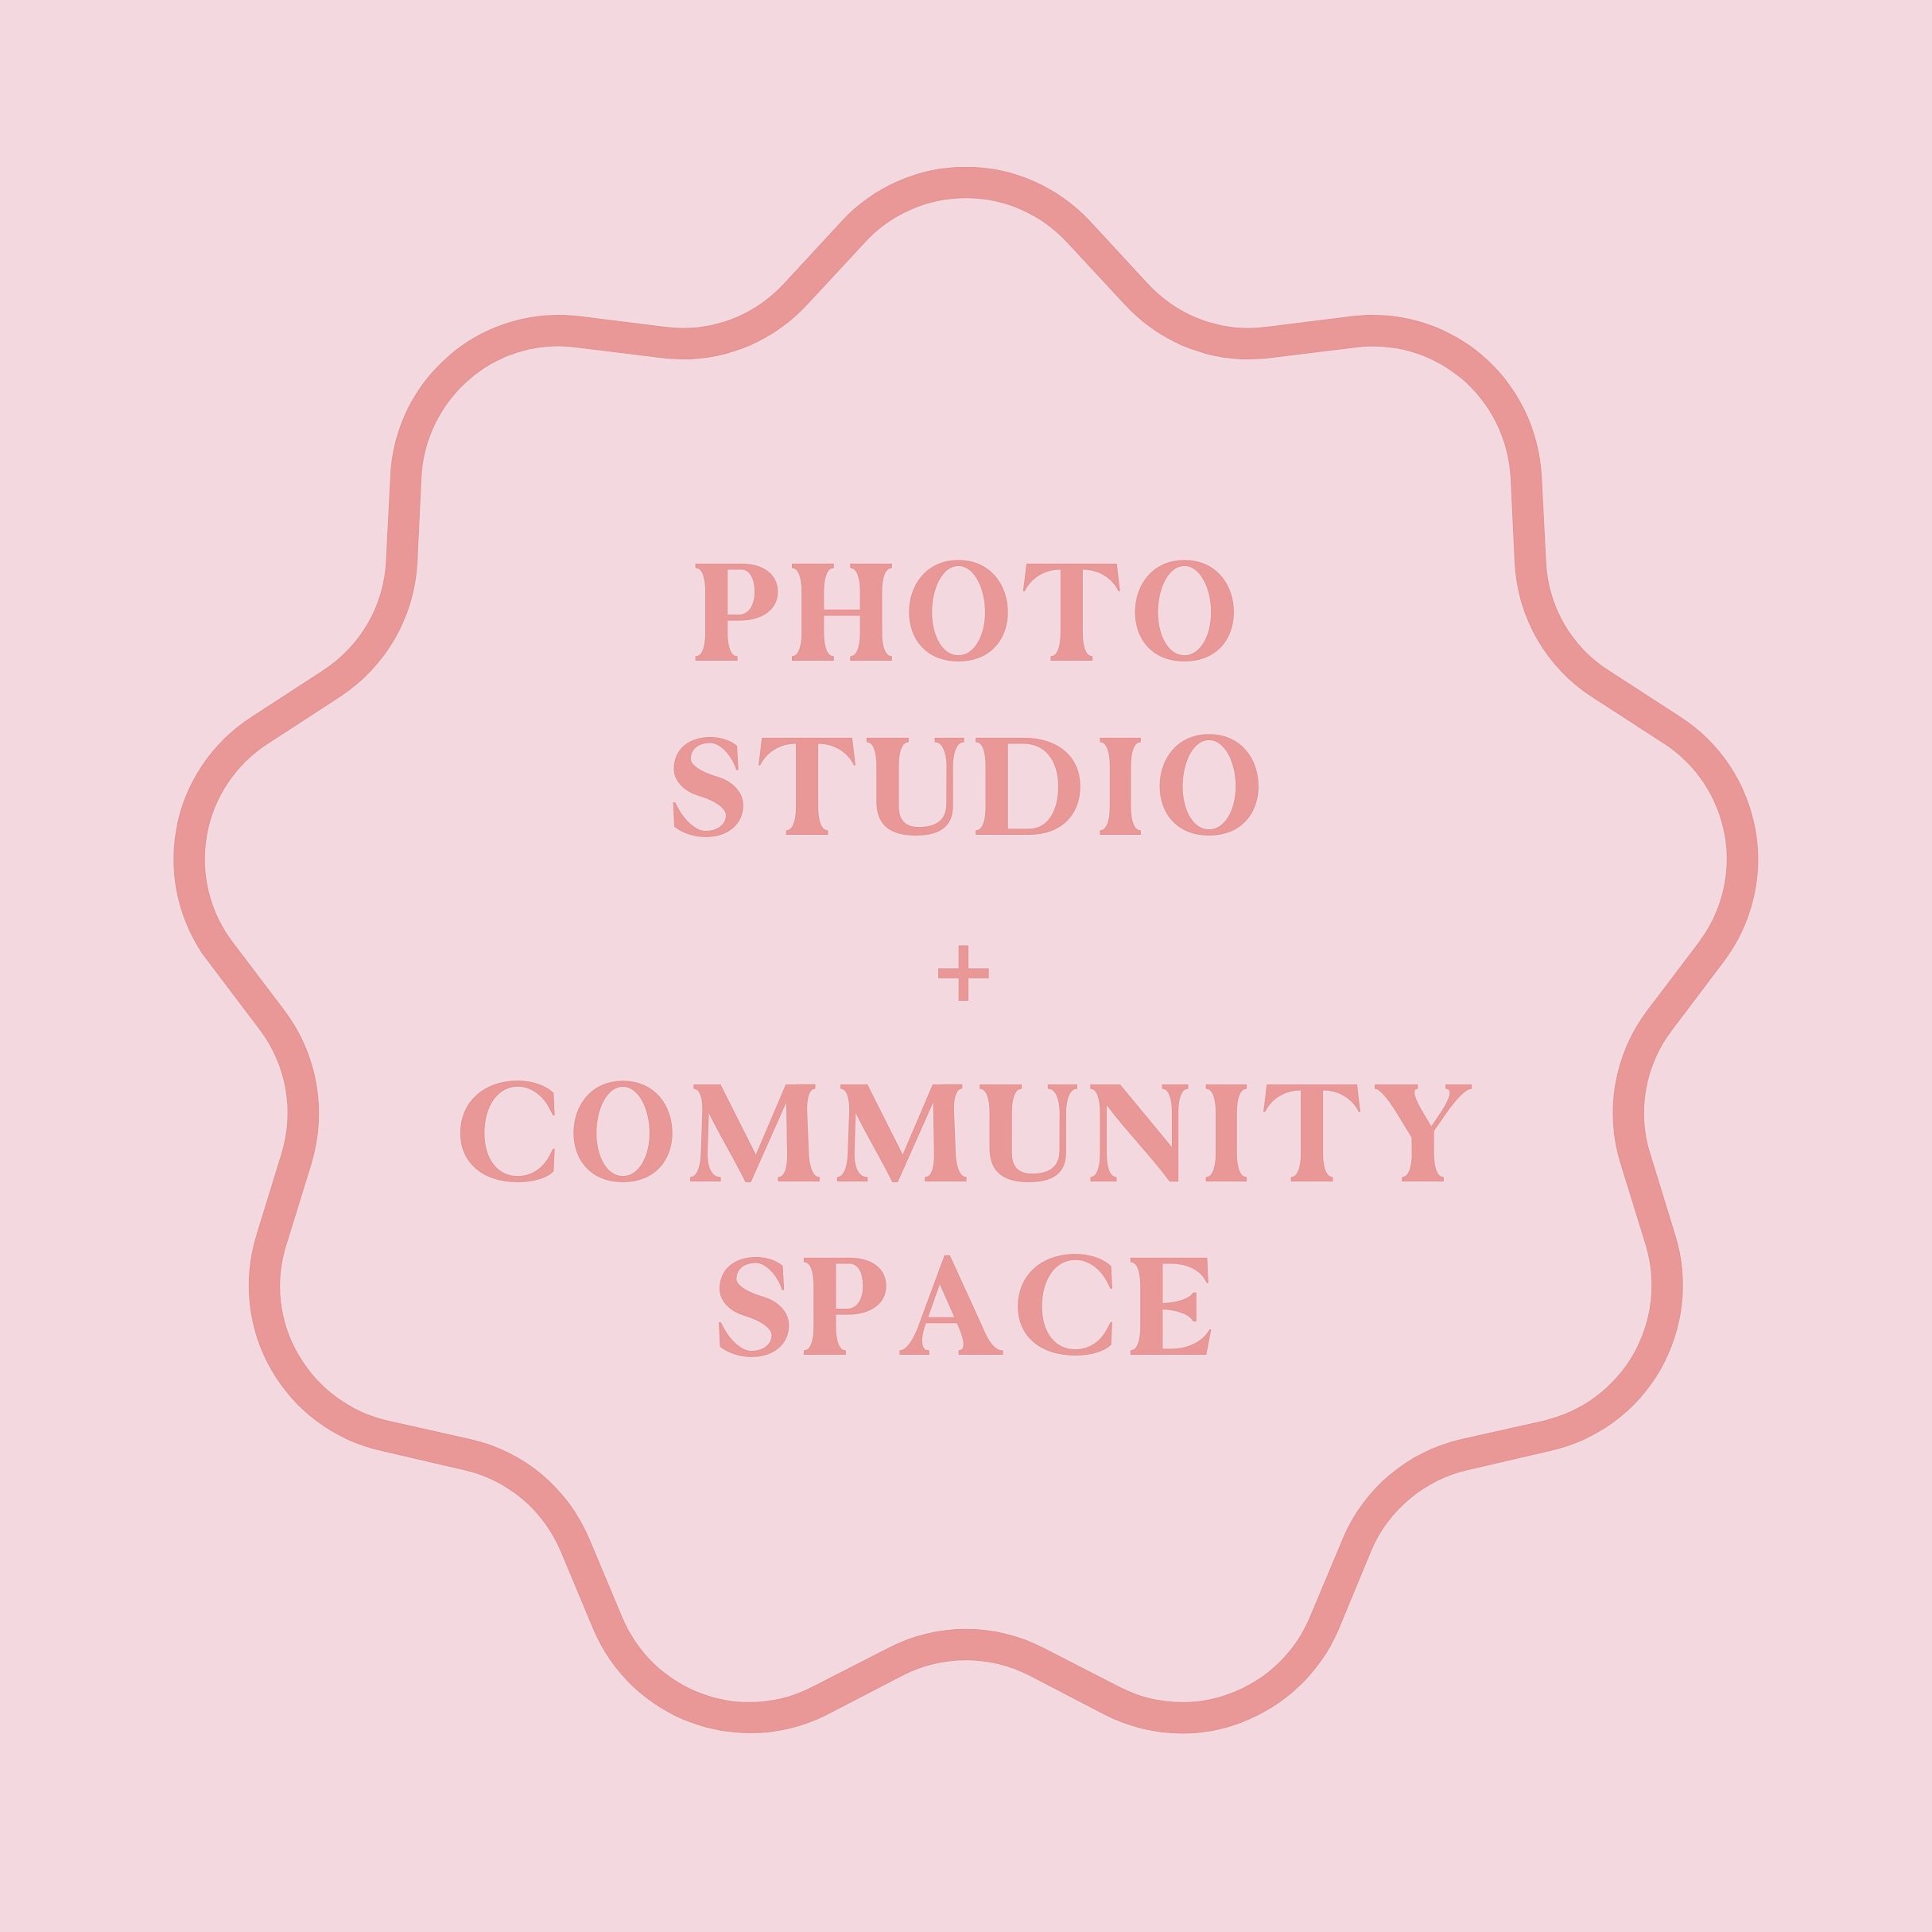 A natural light photo studio + community space is coming to a town near you!

We are excited to host:
- photographers
-content creation days
-co-working days
-workshops/retreats
-small business pop-ups
-mini classes
-business meetings
-getting ready 